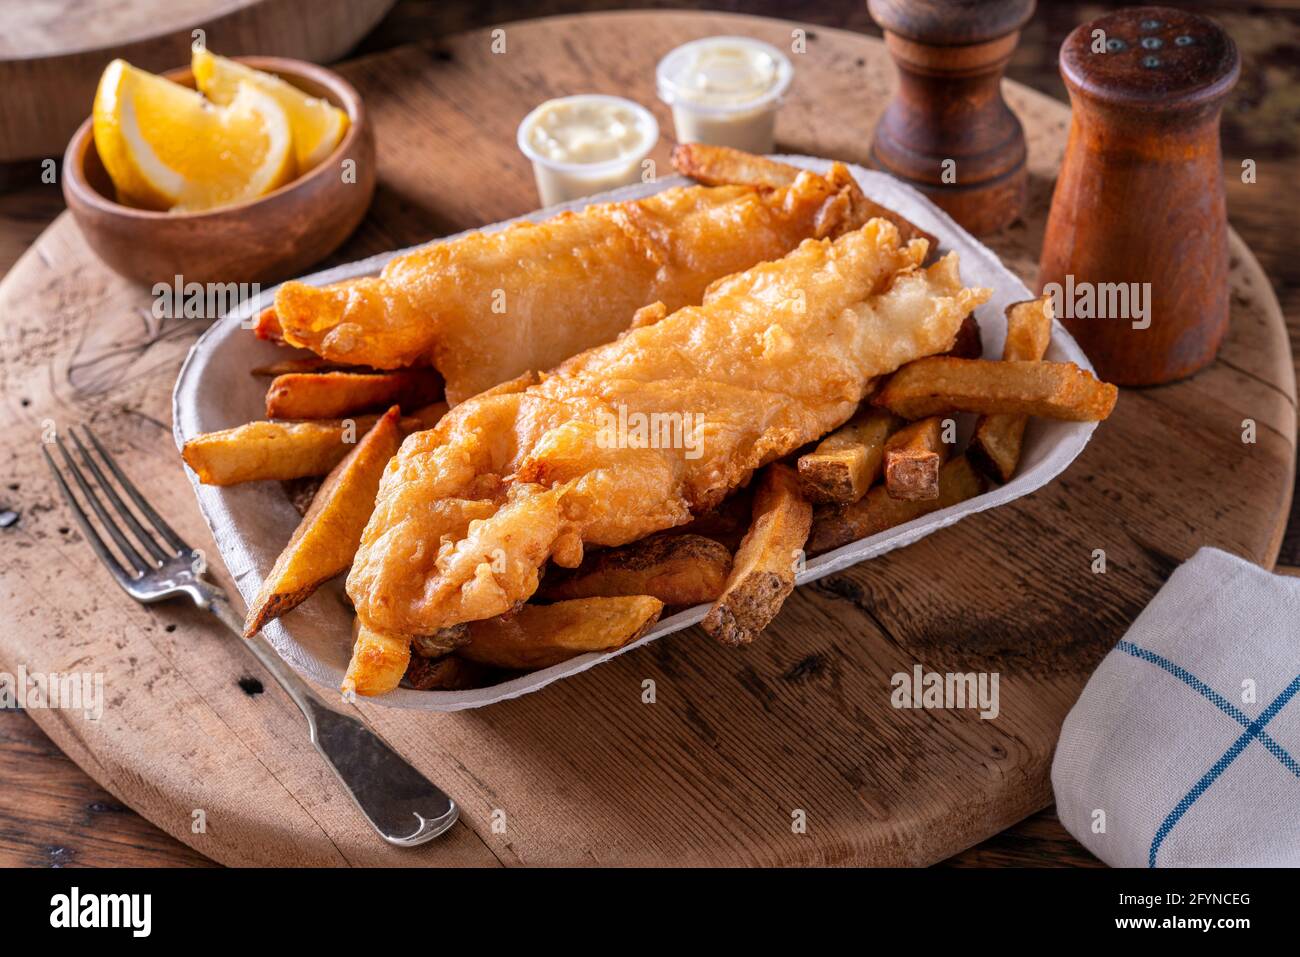 Delicious batter fried fish and chips. Stock Photo